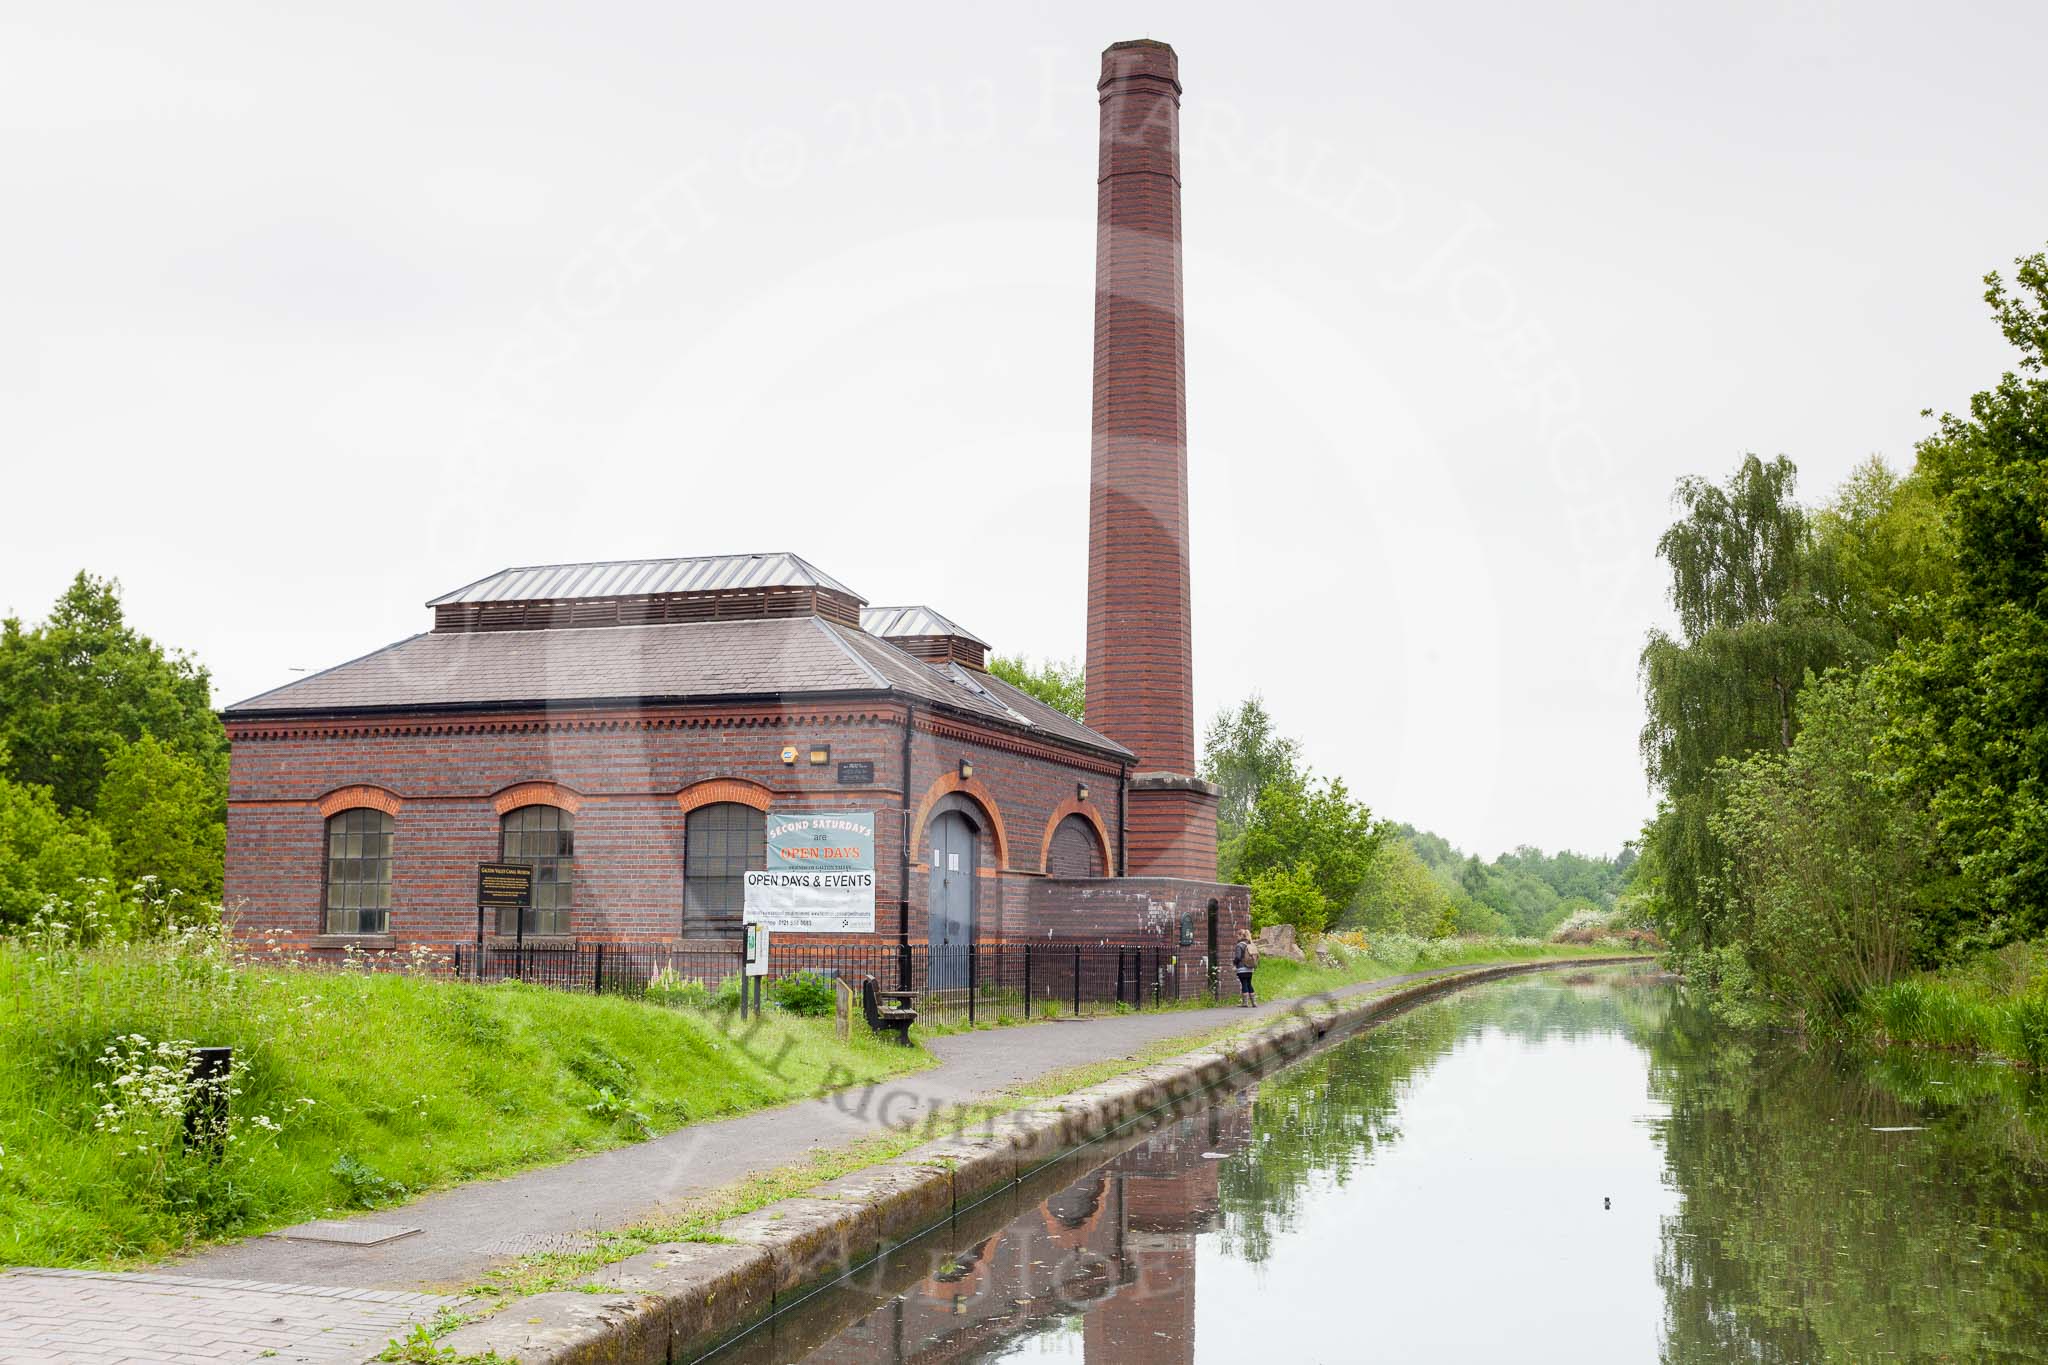 BCN 24h Marathon Challenge 2015: Smethwick Pumping Station (Galton Valley Heritage Centre) on the BCN Old Main Line near Engine Arm Junction.
Birmingham Canal Navigations,



on 23 May 2015 at 11:20, image #83